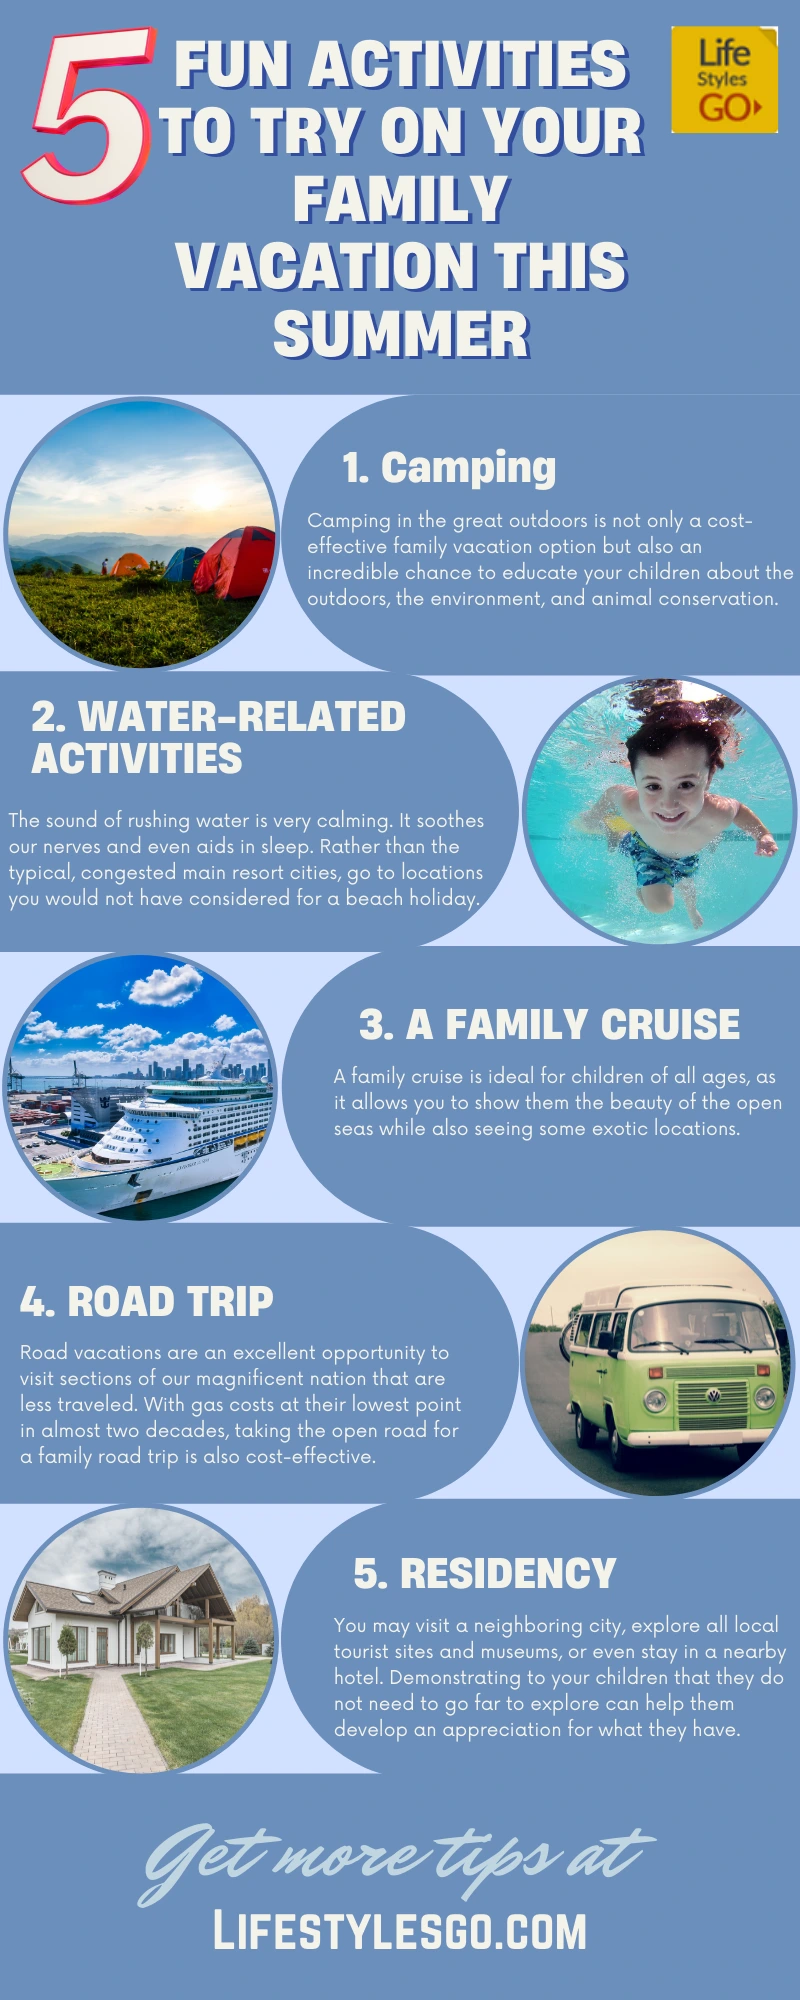 Fun Activities to Try on Your Family Vacation This Summer Infographic